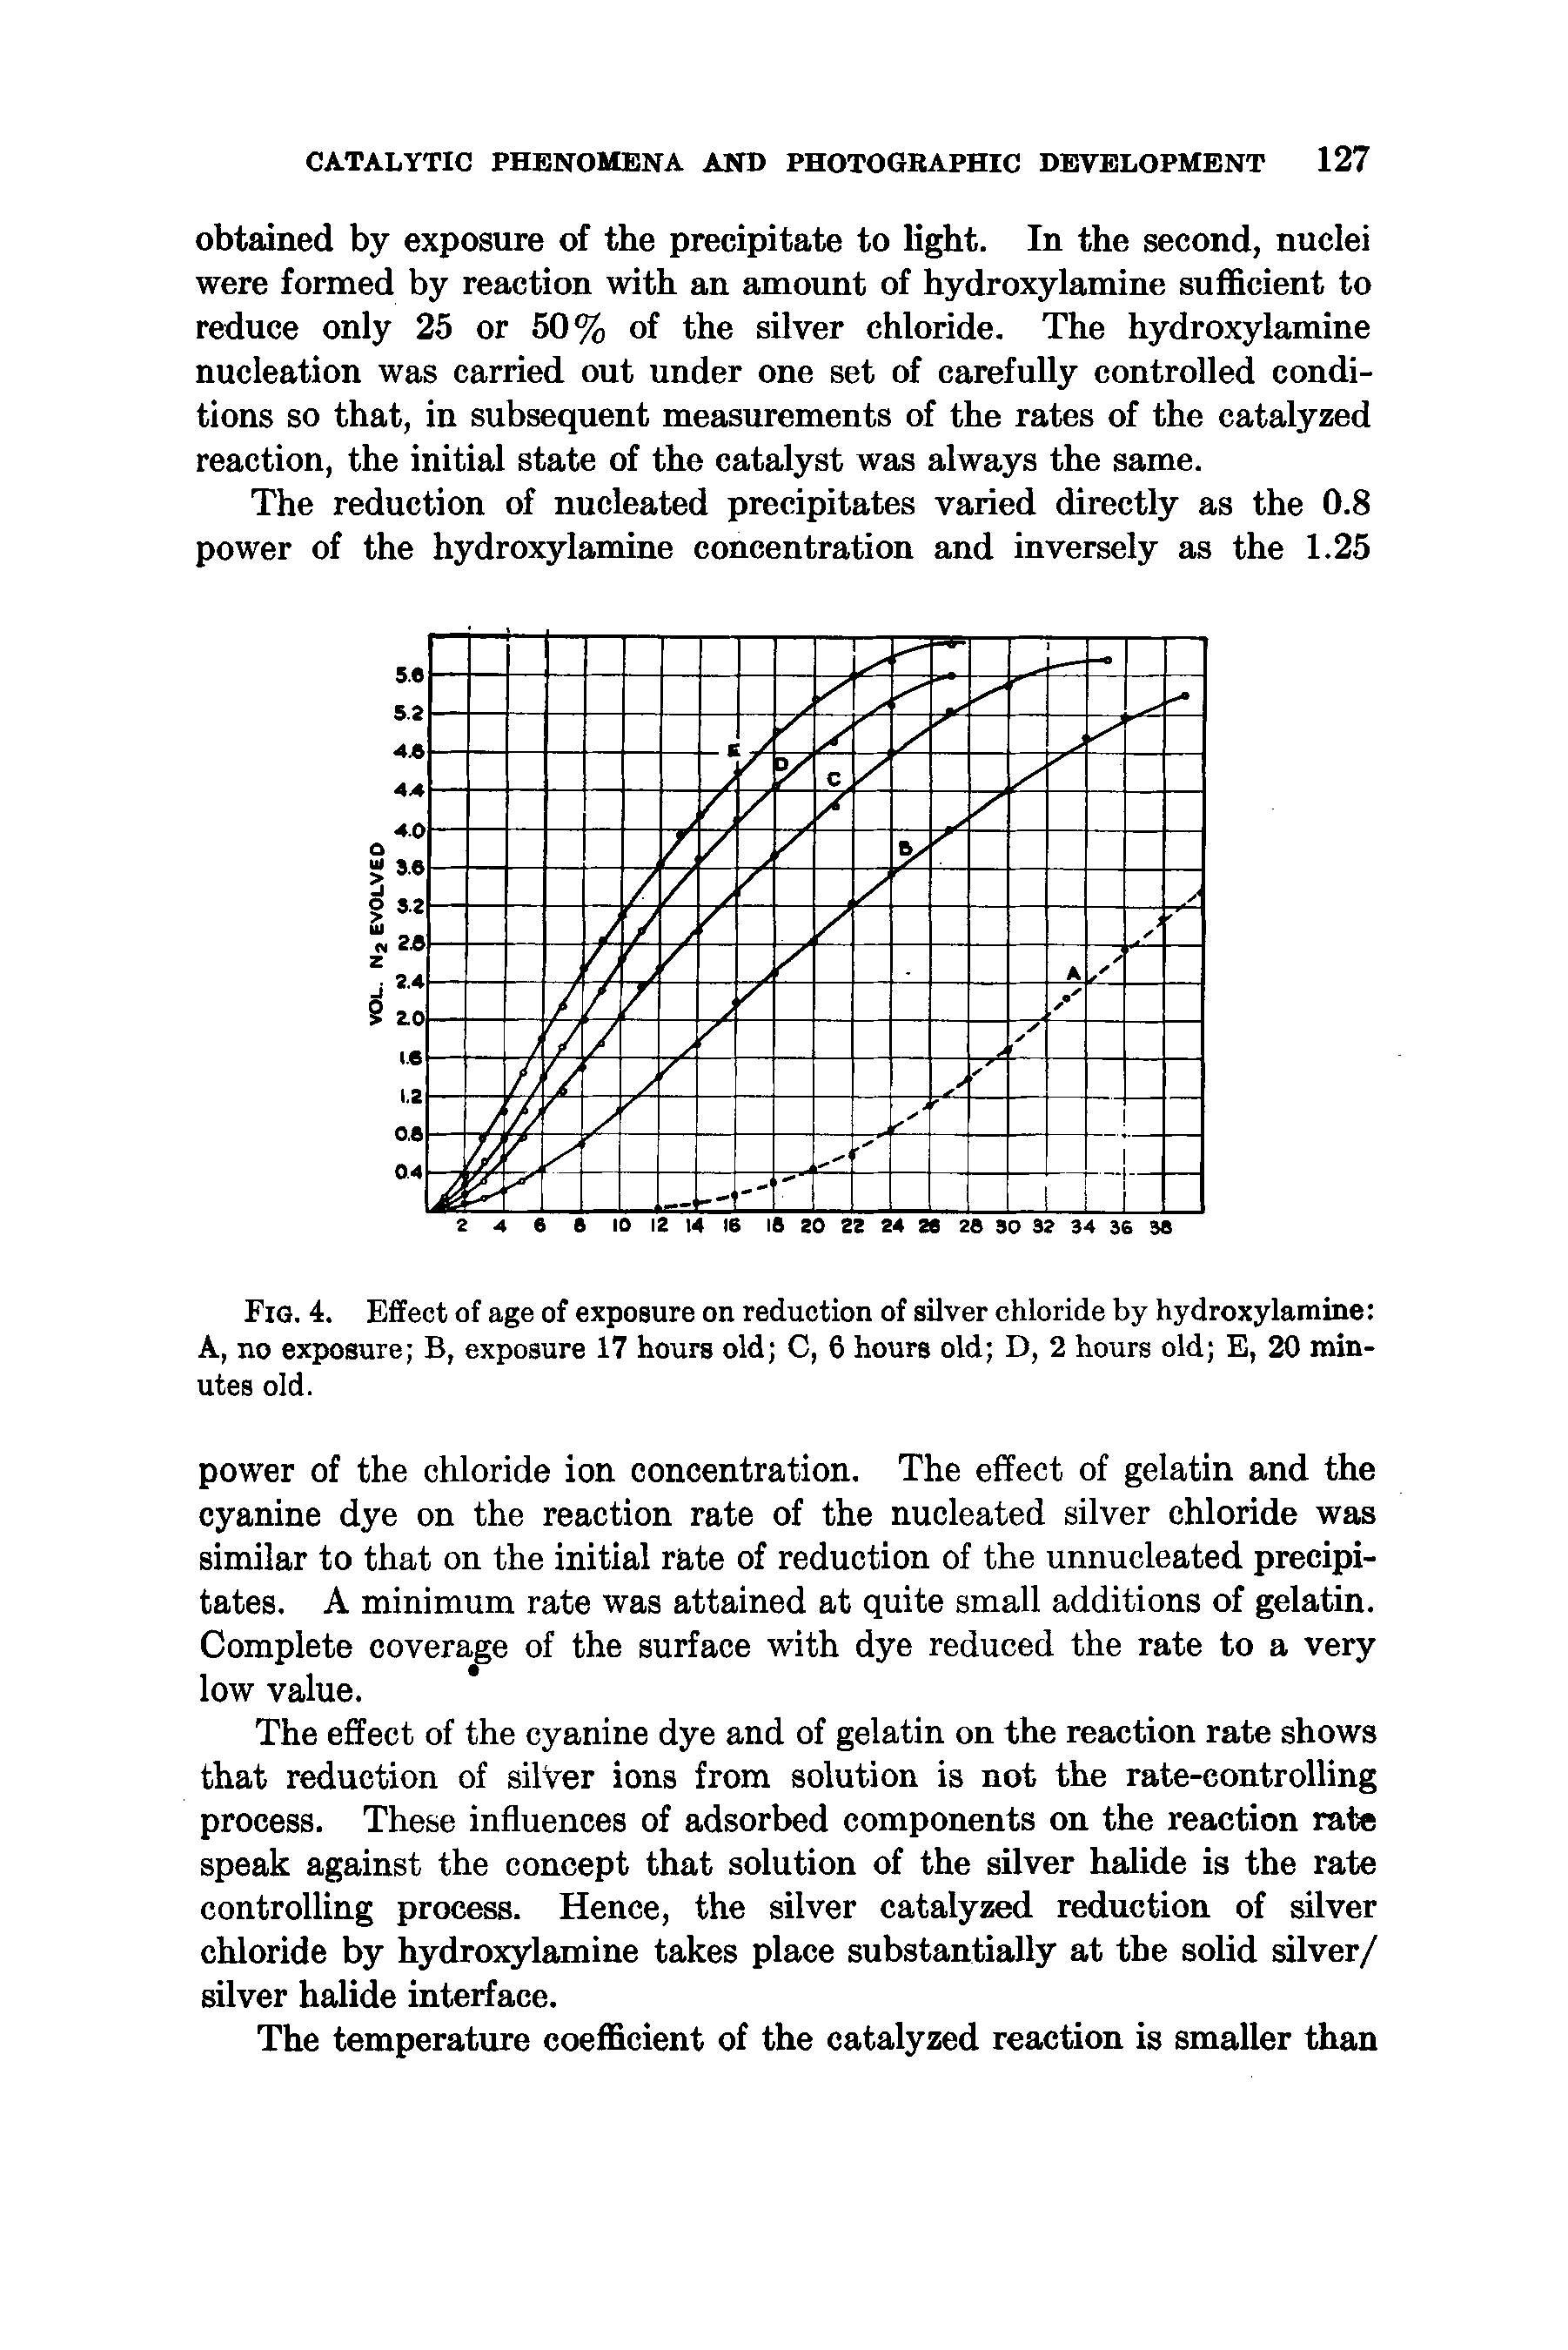 Fig. 4. Effect of age of exposure on reduction of silver chloride by hydroxylamine A, no exposure B, exposure 17 hours old C, 6 hours old D, 2 hours old E, 20 minutes old.